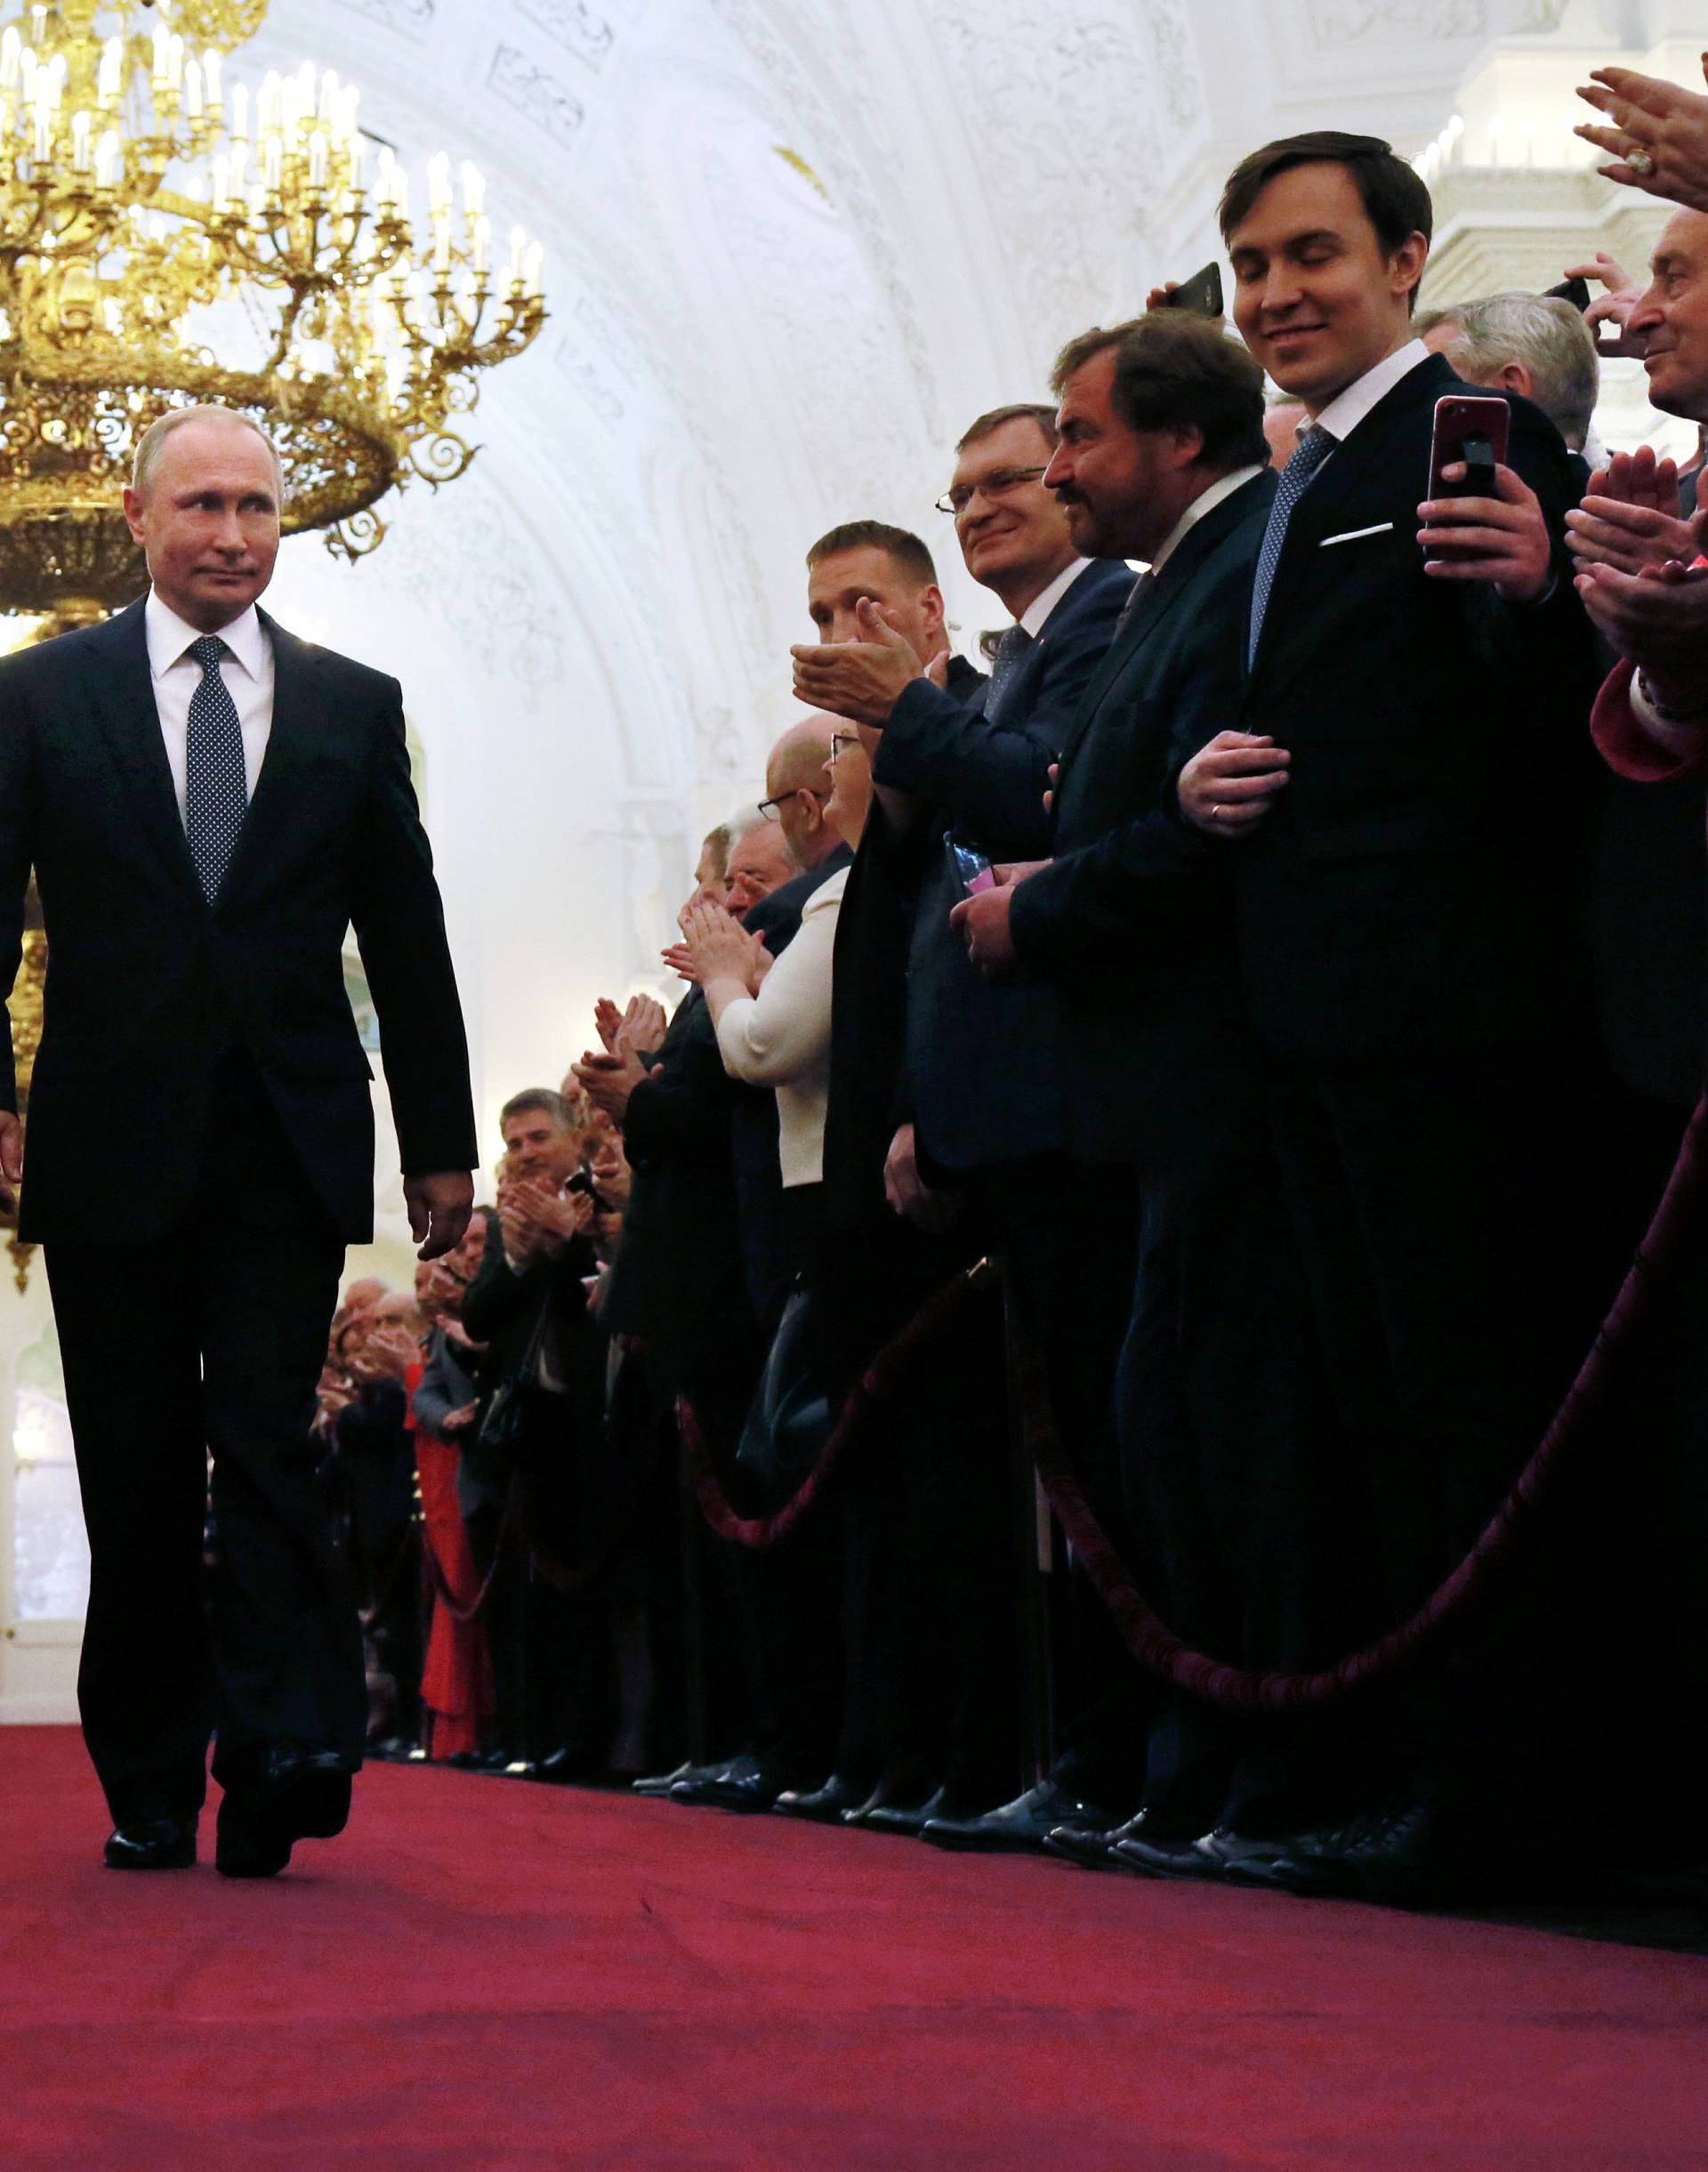 Russian President Putin walks before an inauguration ceremony at the Kremlin in Moscow